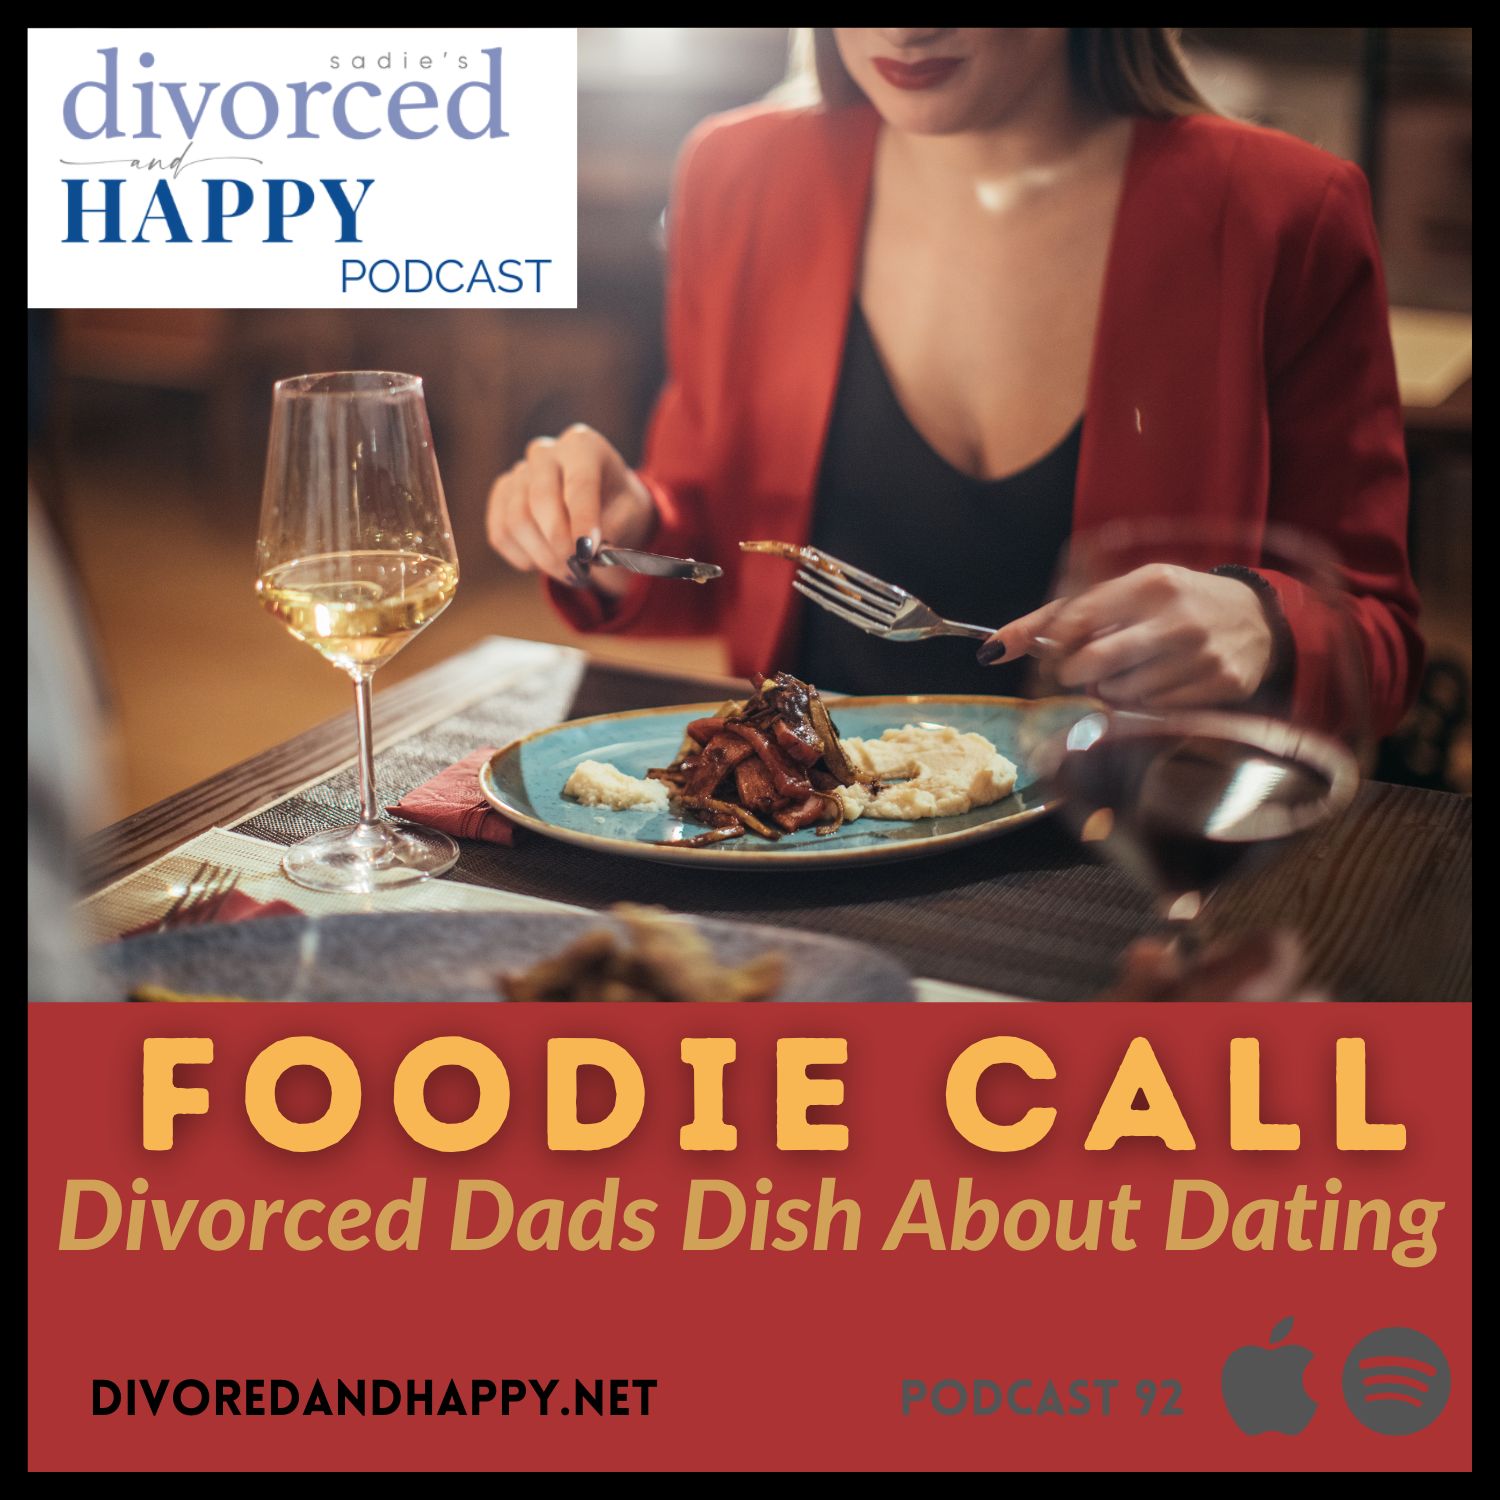 Foodie Calls:  Divorced Dads Dish About Dating